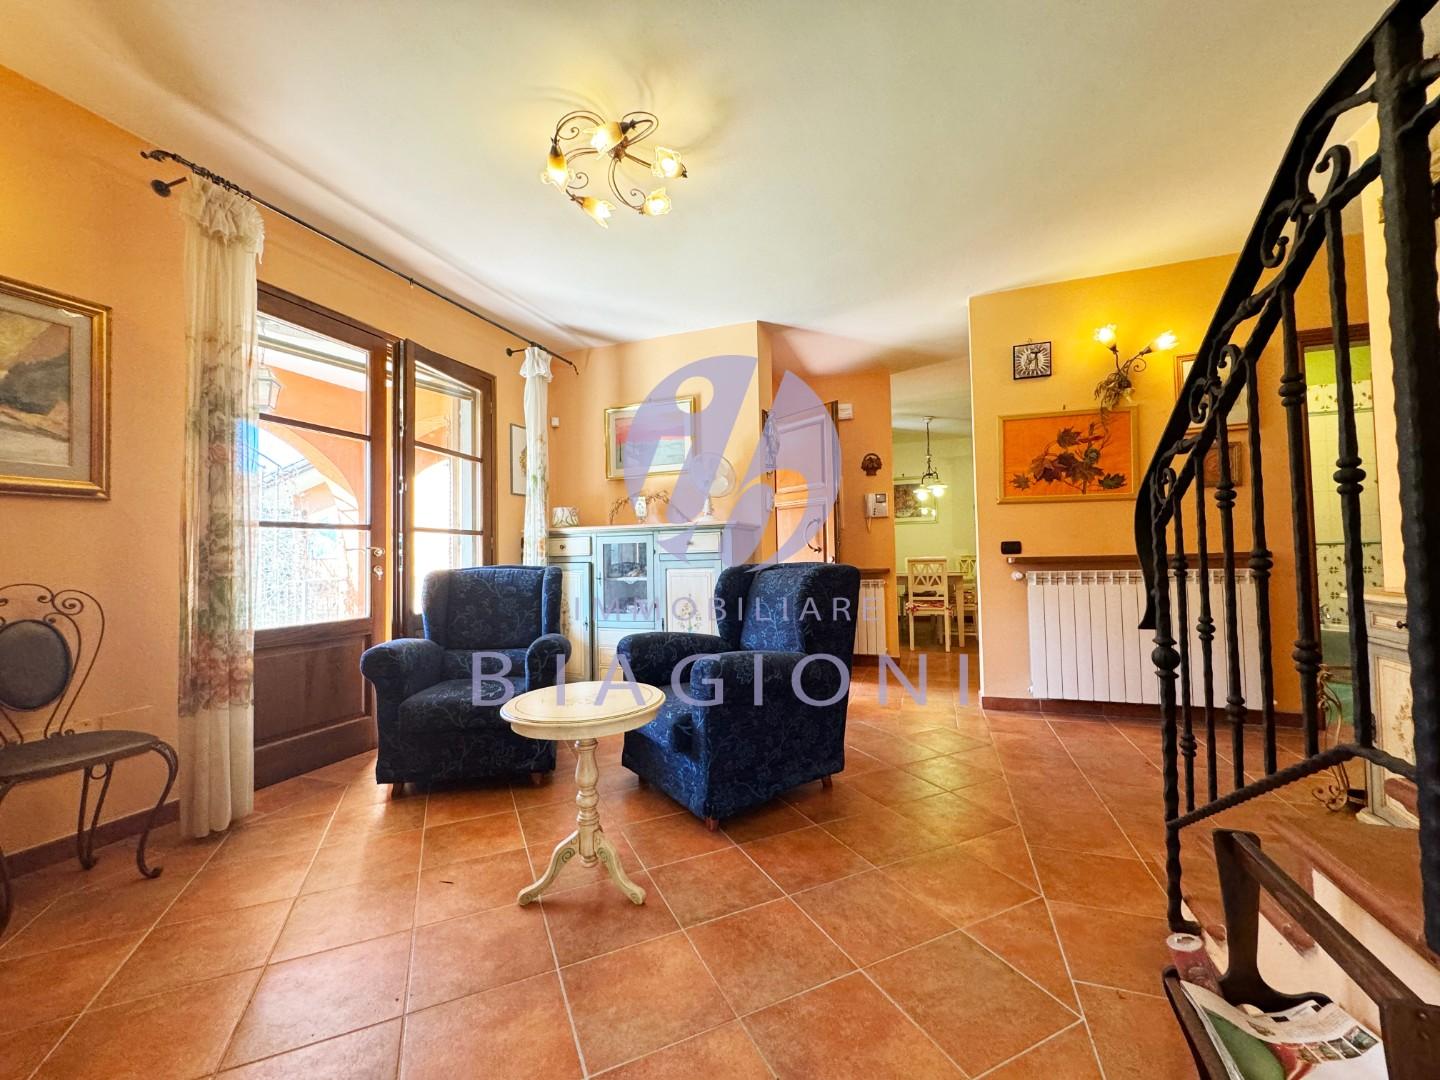 Semi-detached house for sale, ref. 28125